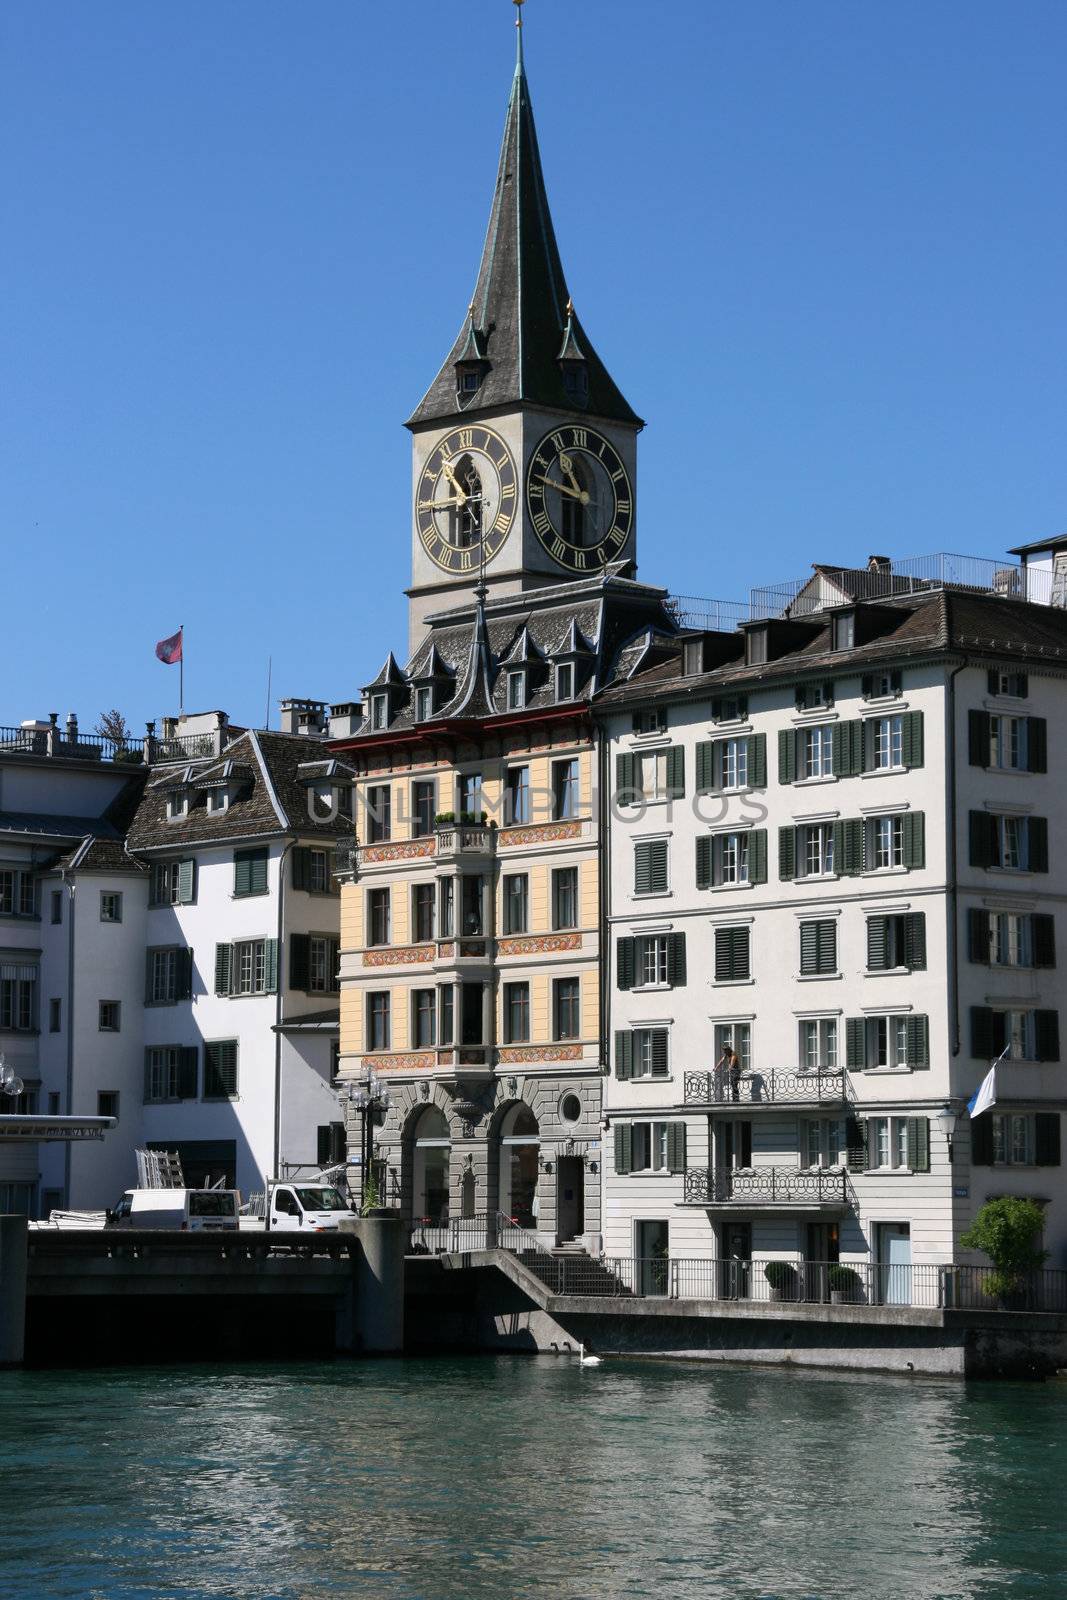 Zurich cityscape. St. Peter's Church tower with world's largest church clock face. Swiss city.